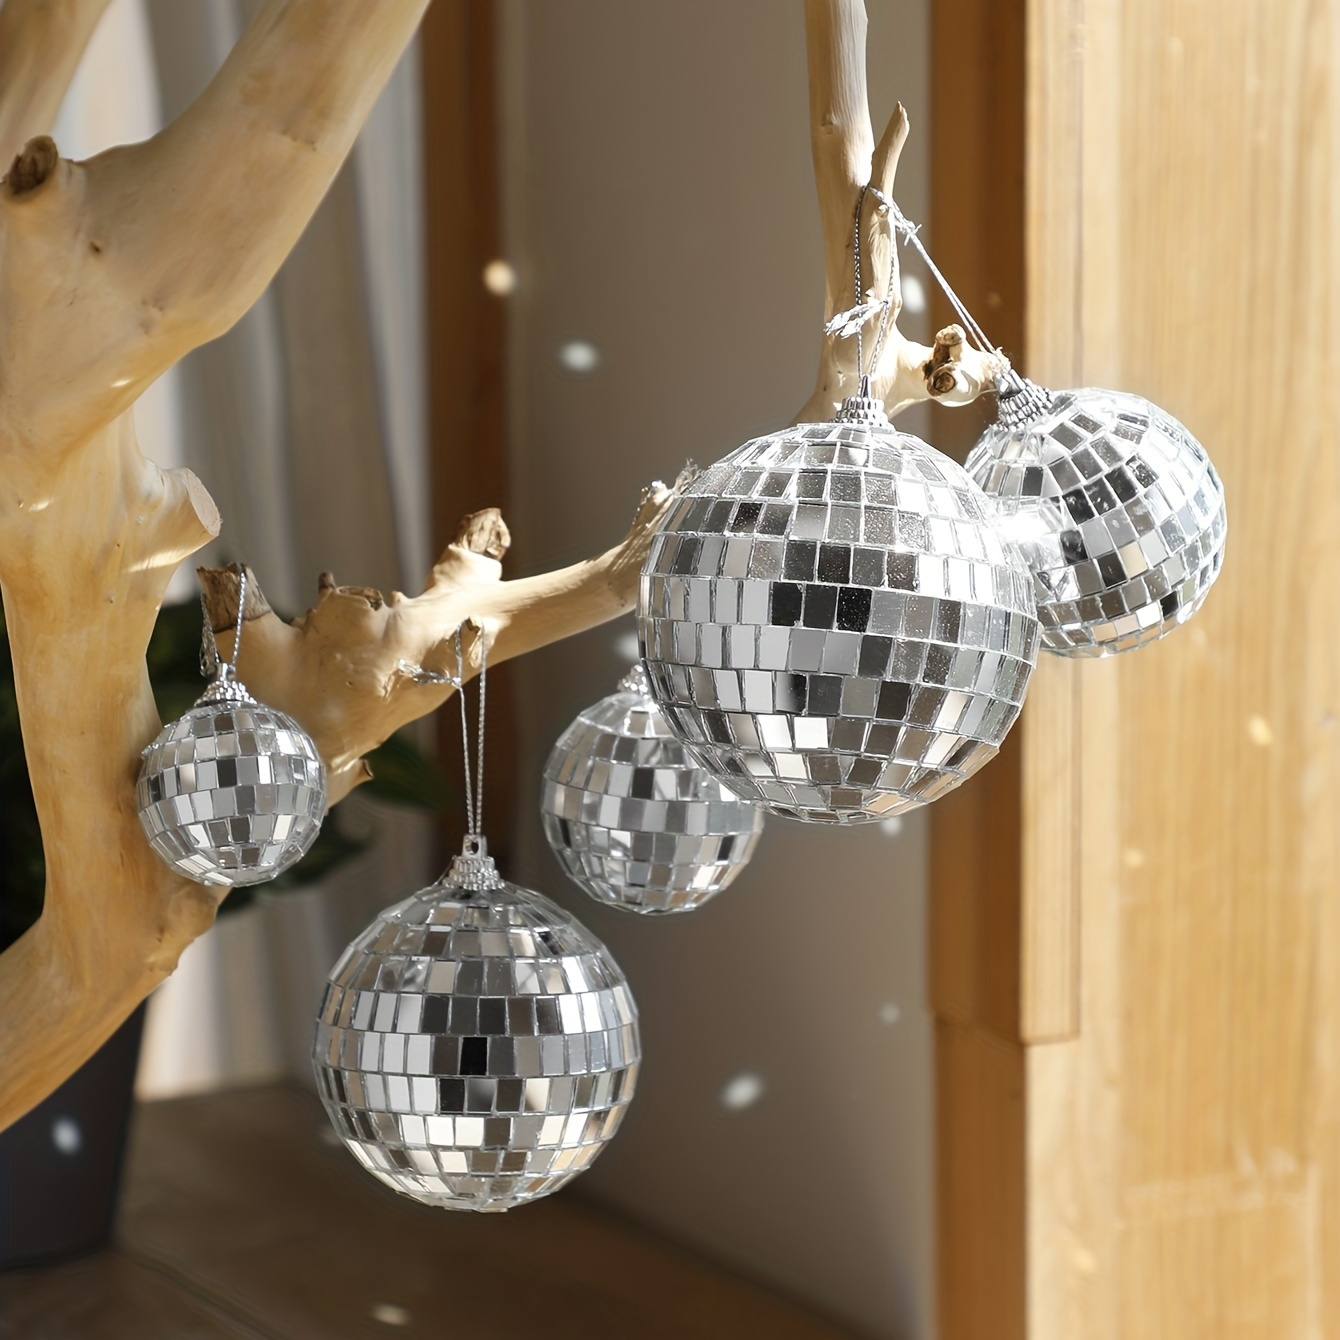 Bohemian Mirror Disco Ball Silver Glass Reflective Hanging Ball Decoration,  Suitable For Home, Living Room, Bedroom Wall Decoration Pendant Scene Decor,  Room Decor, Home Decor, Window Decor Pendant, Holiday Party Decor 